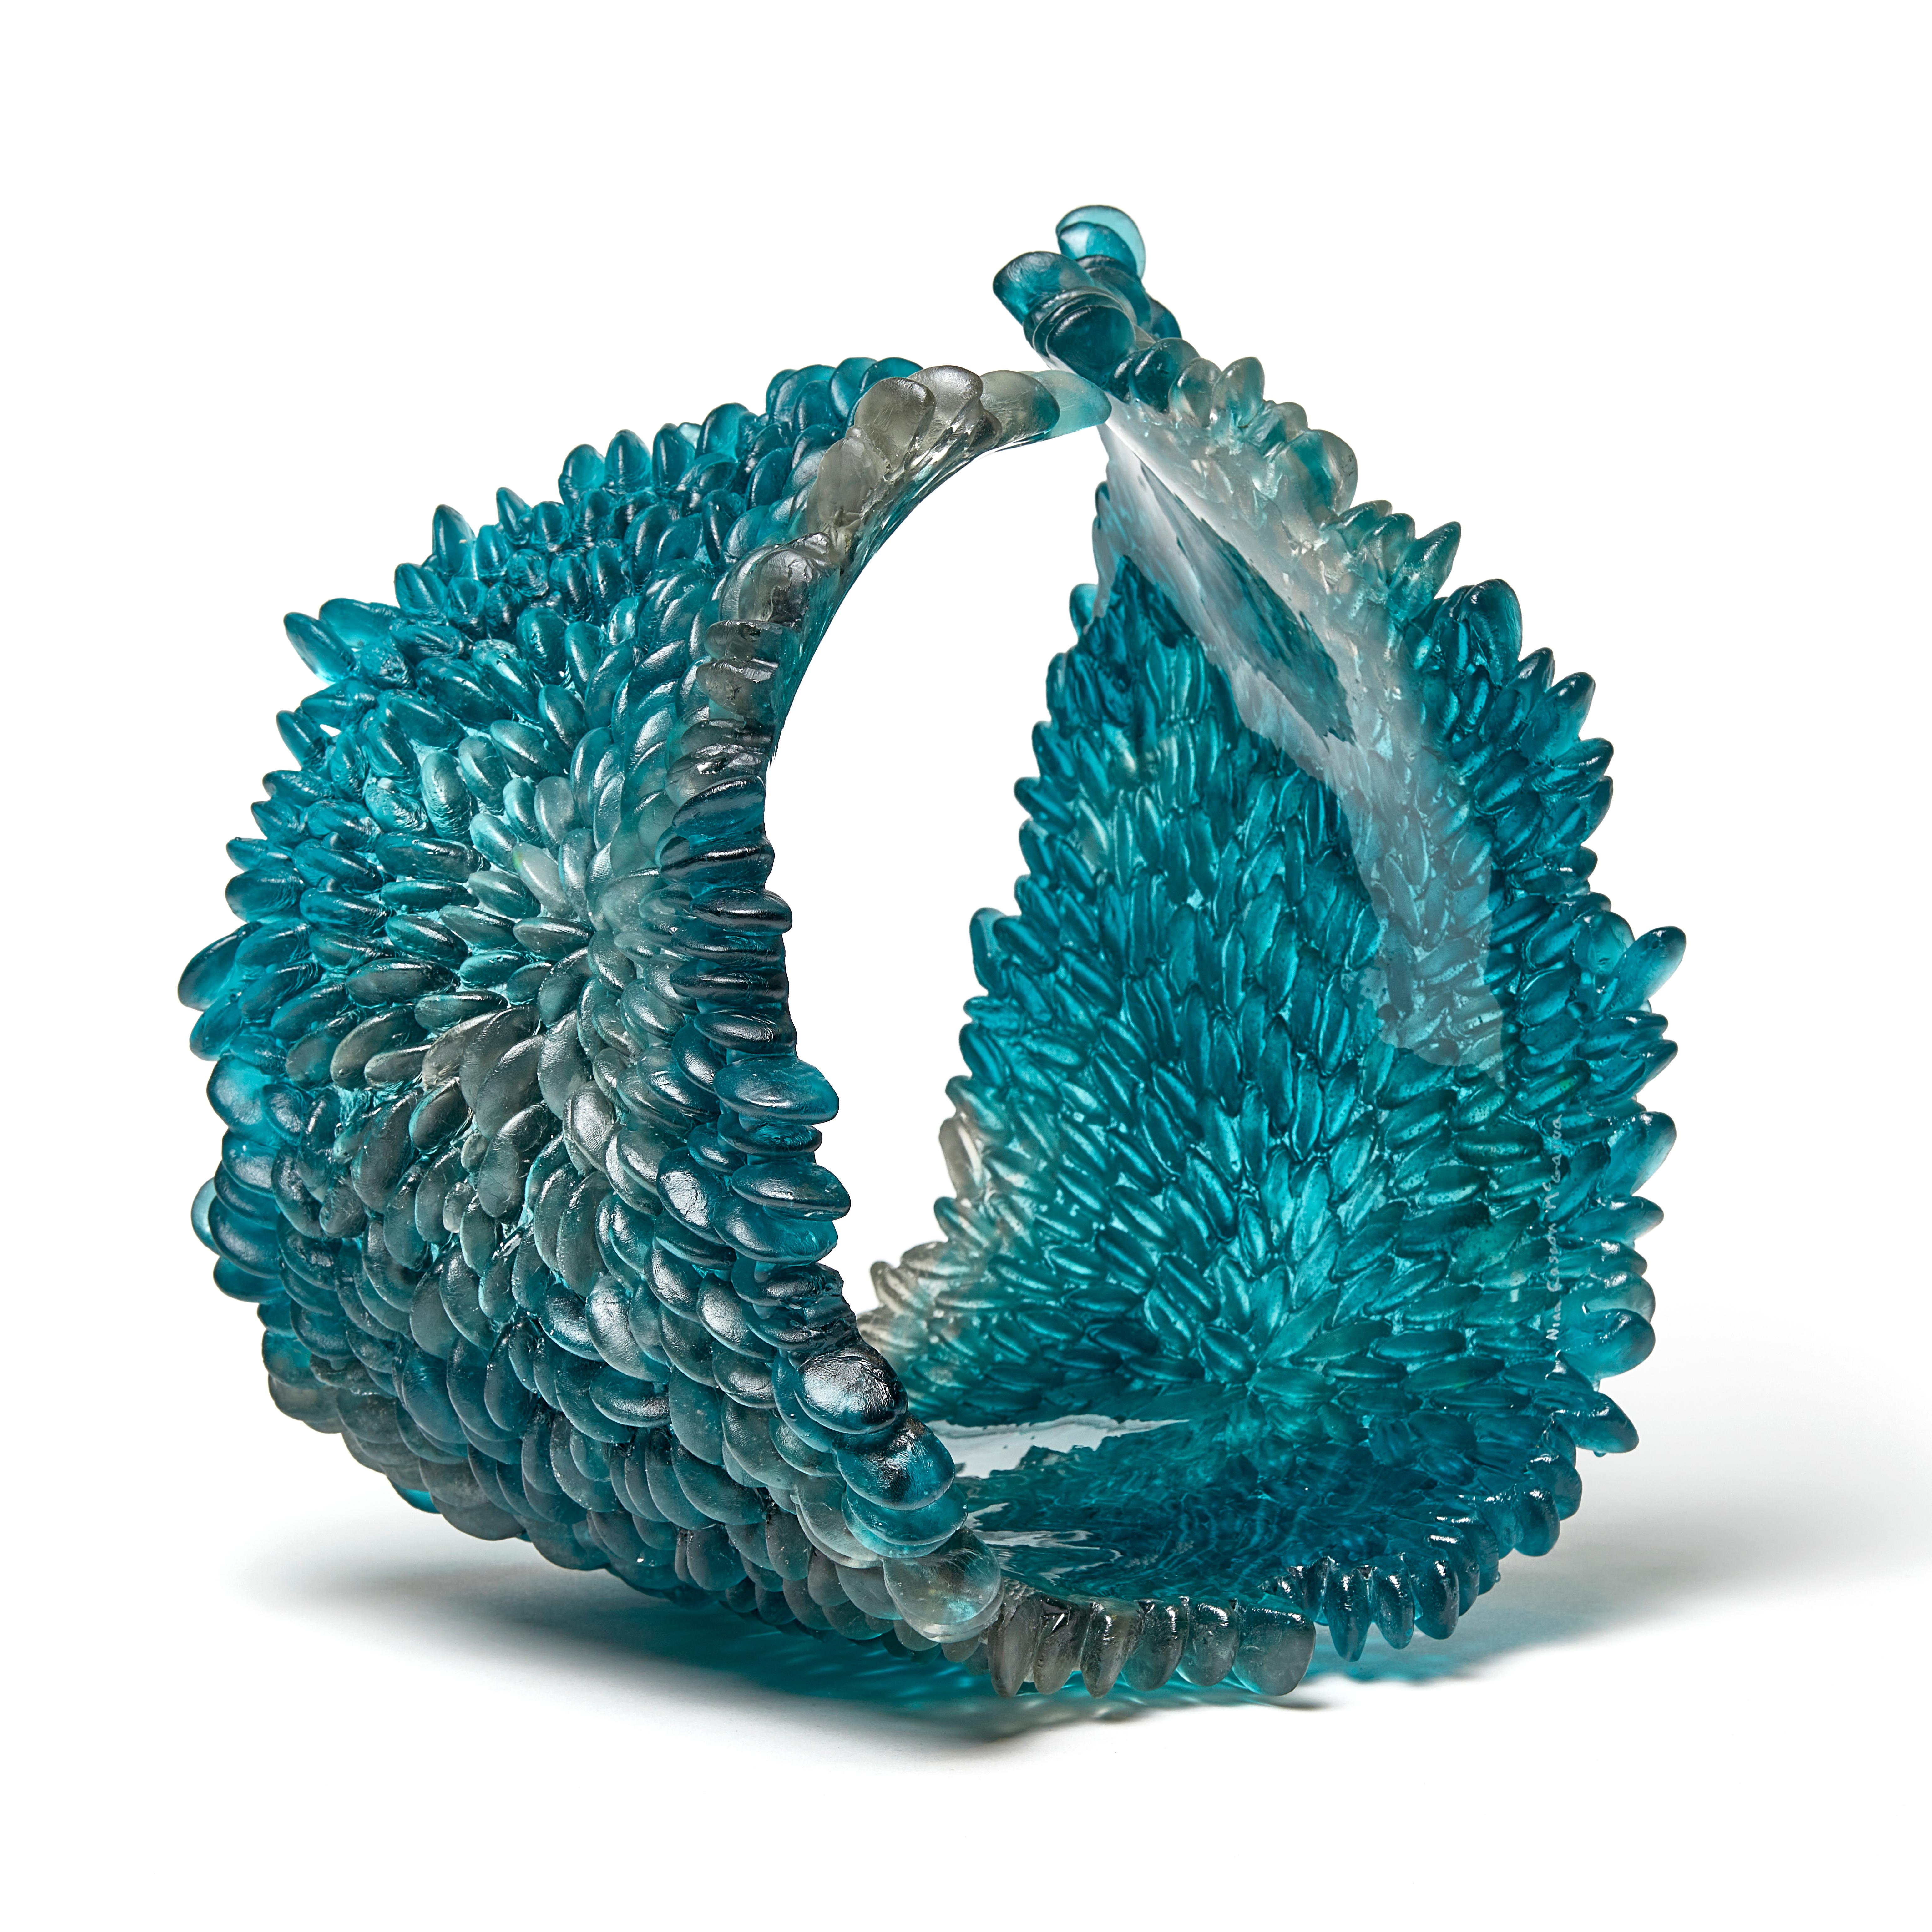 Curled Over IV is a unique textured glass sculpture in teal blue / deep aquamarine and grey by the British artist Nina Casson McGarva. 

Casson McGarva firstly casts her glass in a flat mould where she introduces all of the beautifully detailed,